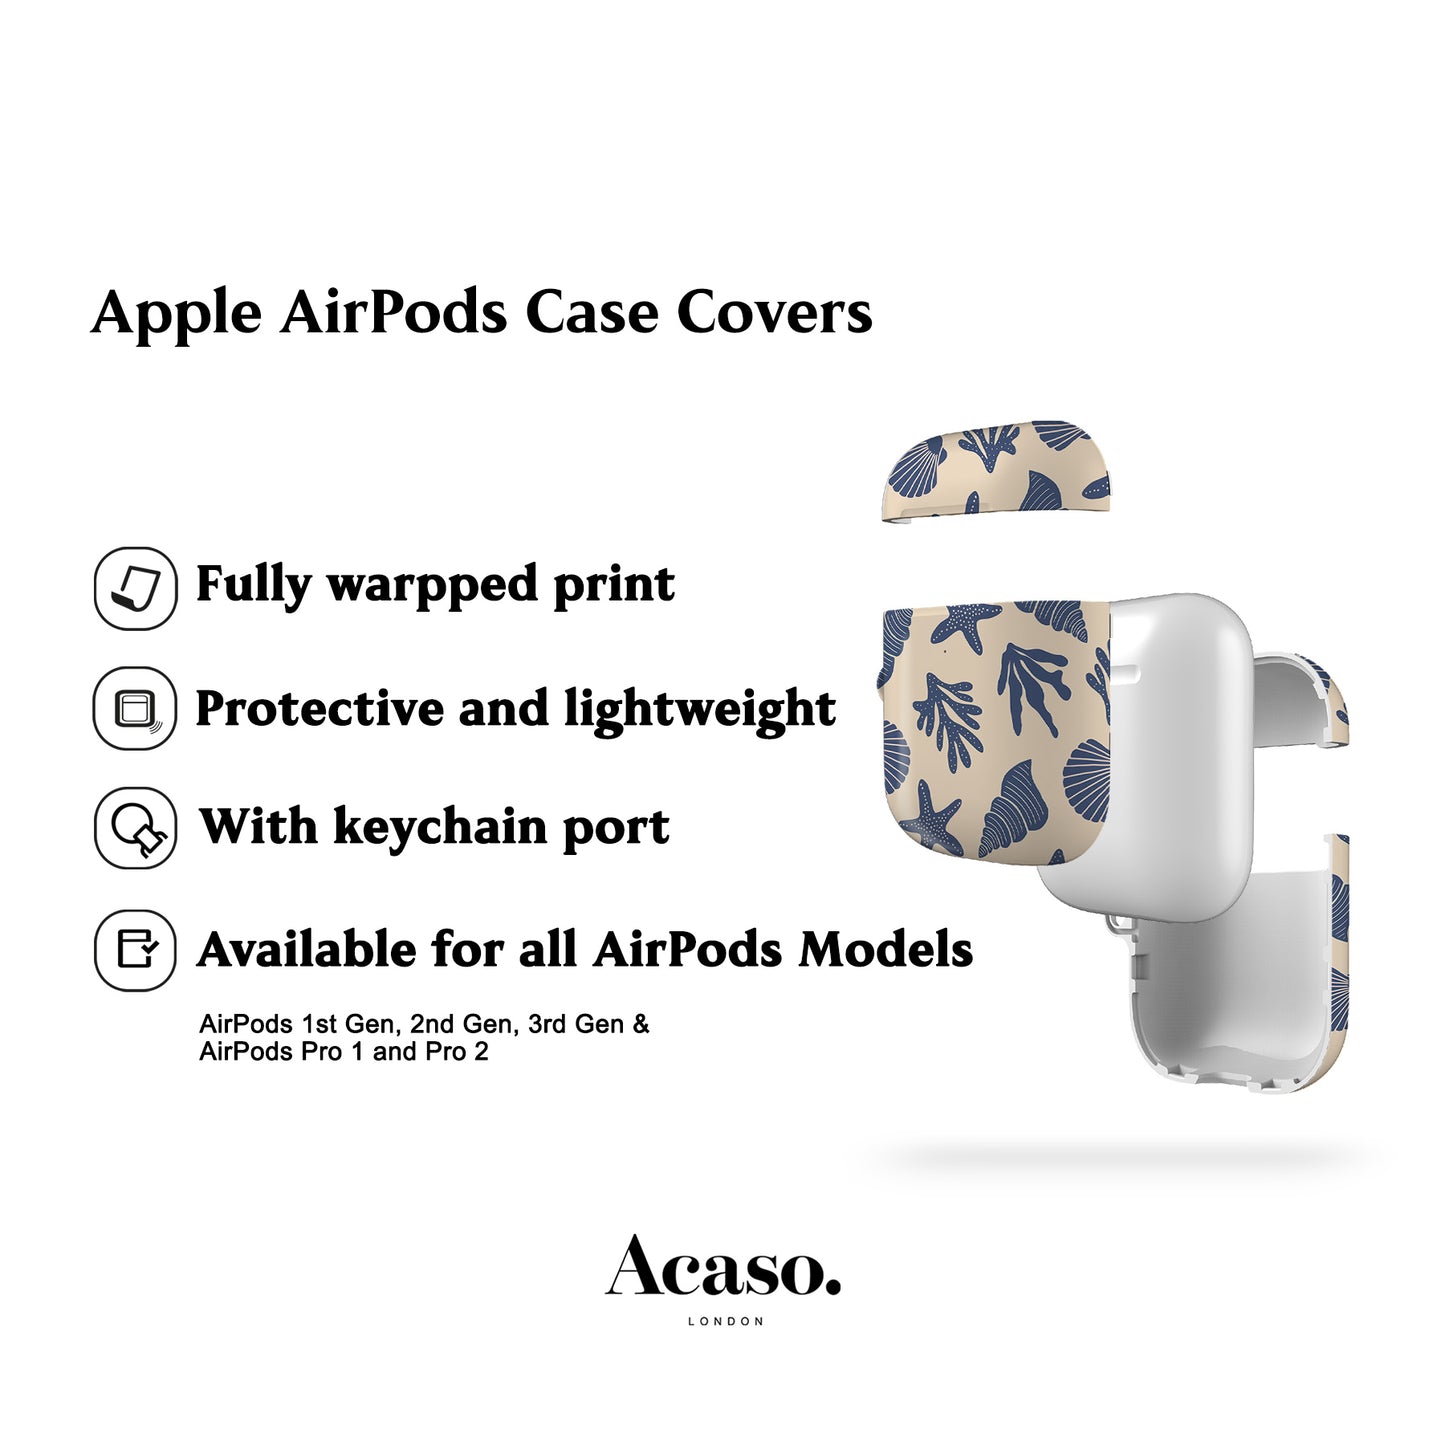 Corals and Shells AirPods Case Cover